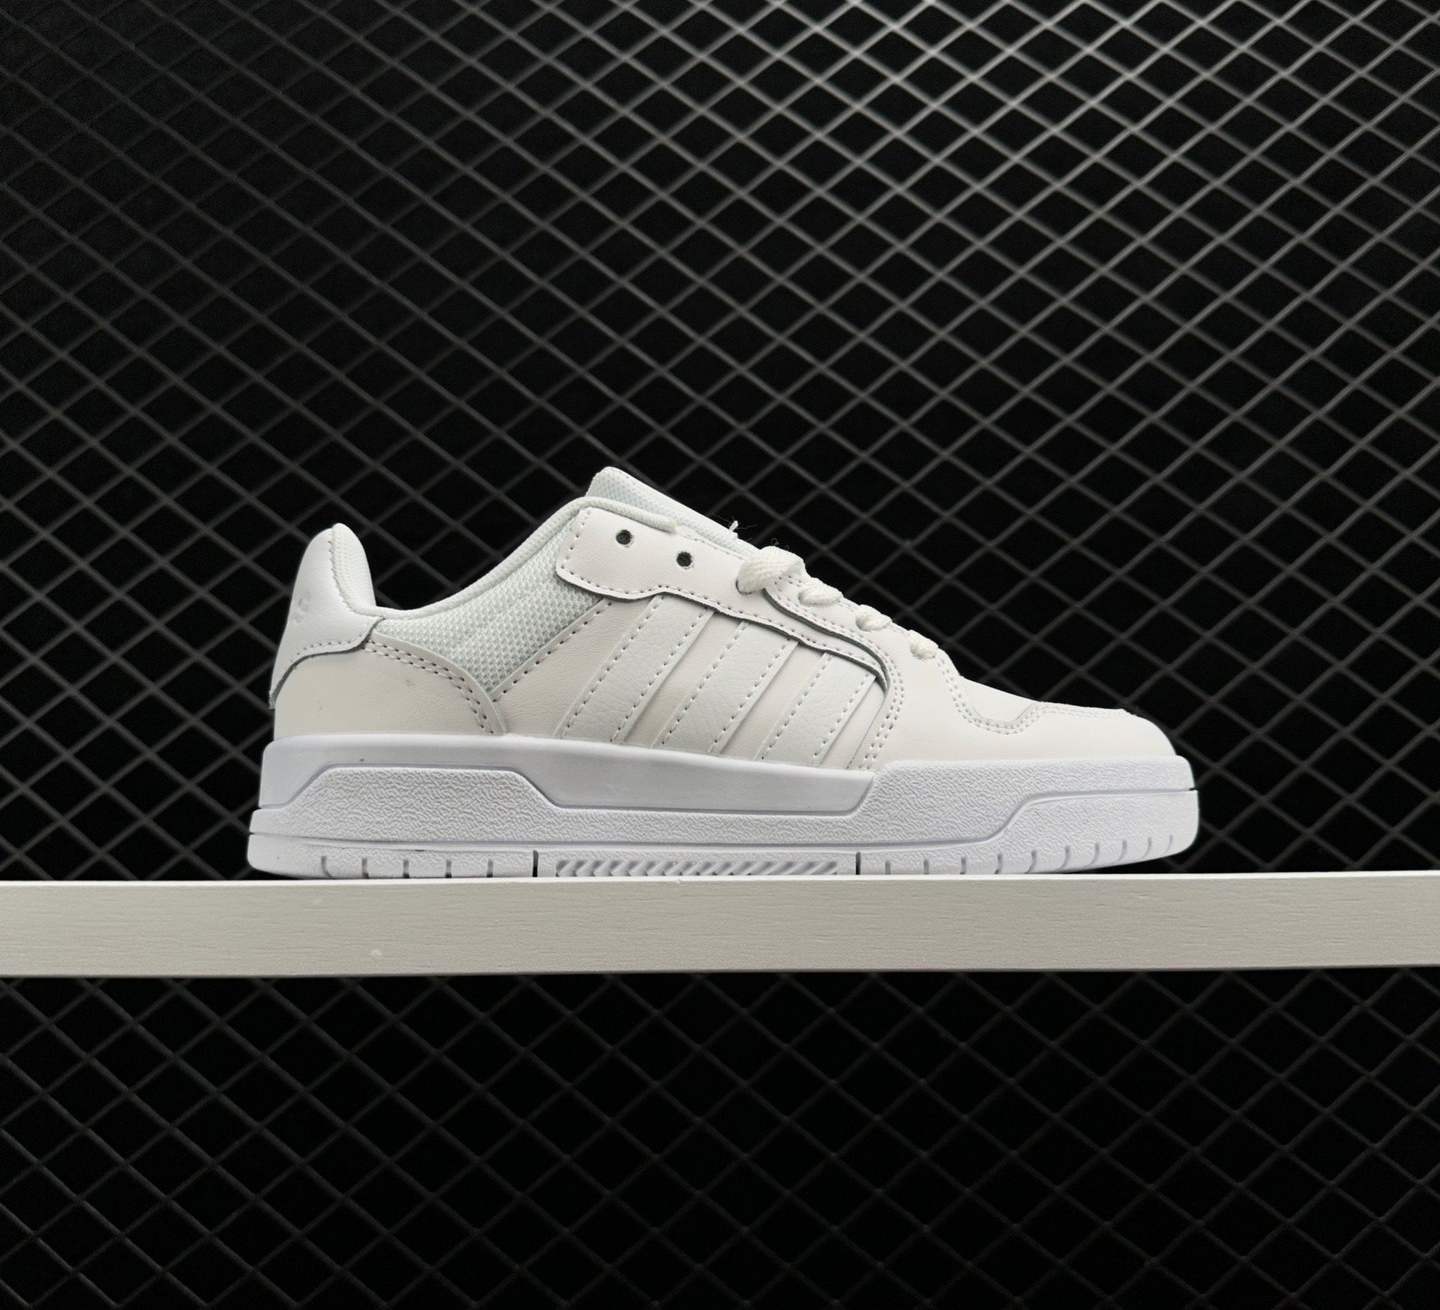 Adidas Neo Entrap White - Stylish and Sporty Footwear